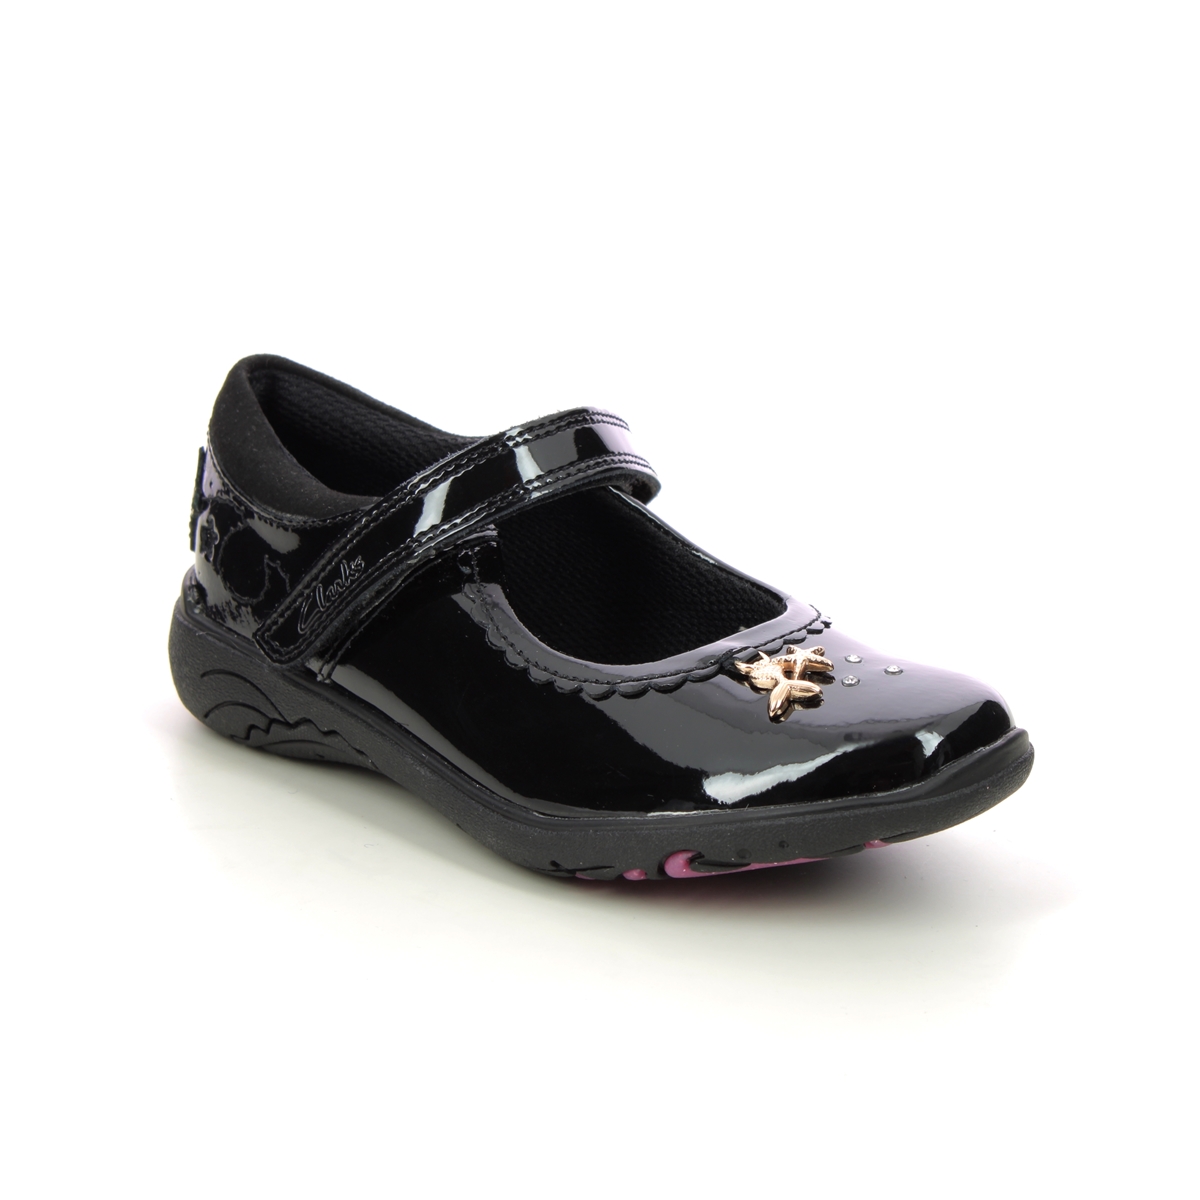 Clarks Relda Sea K Mary Jane Black Patent Kids Girls School Shoes 722418H In Size 11 In Plain Black Patent H Width Fitting Extra Wide For School For k